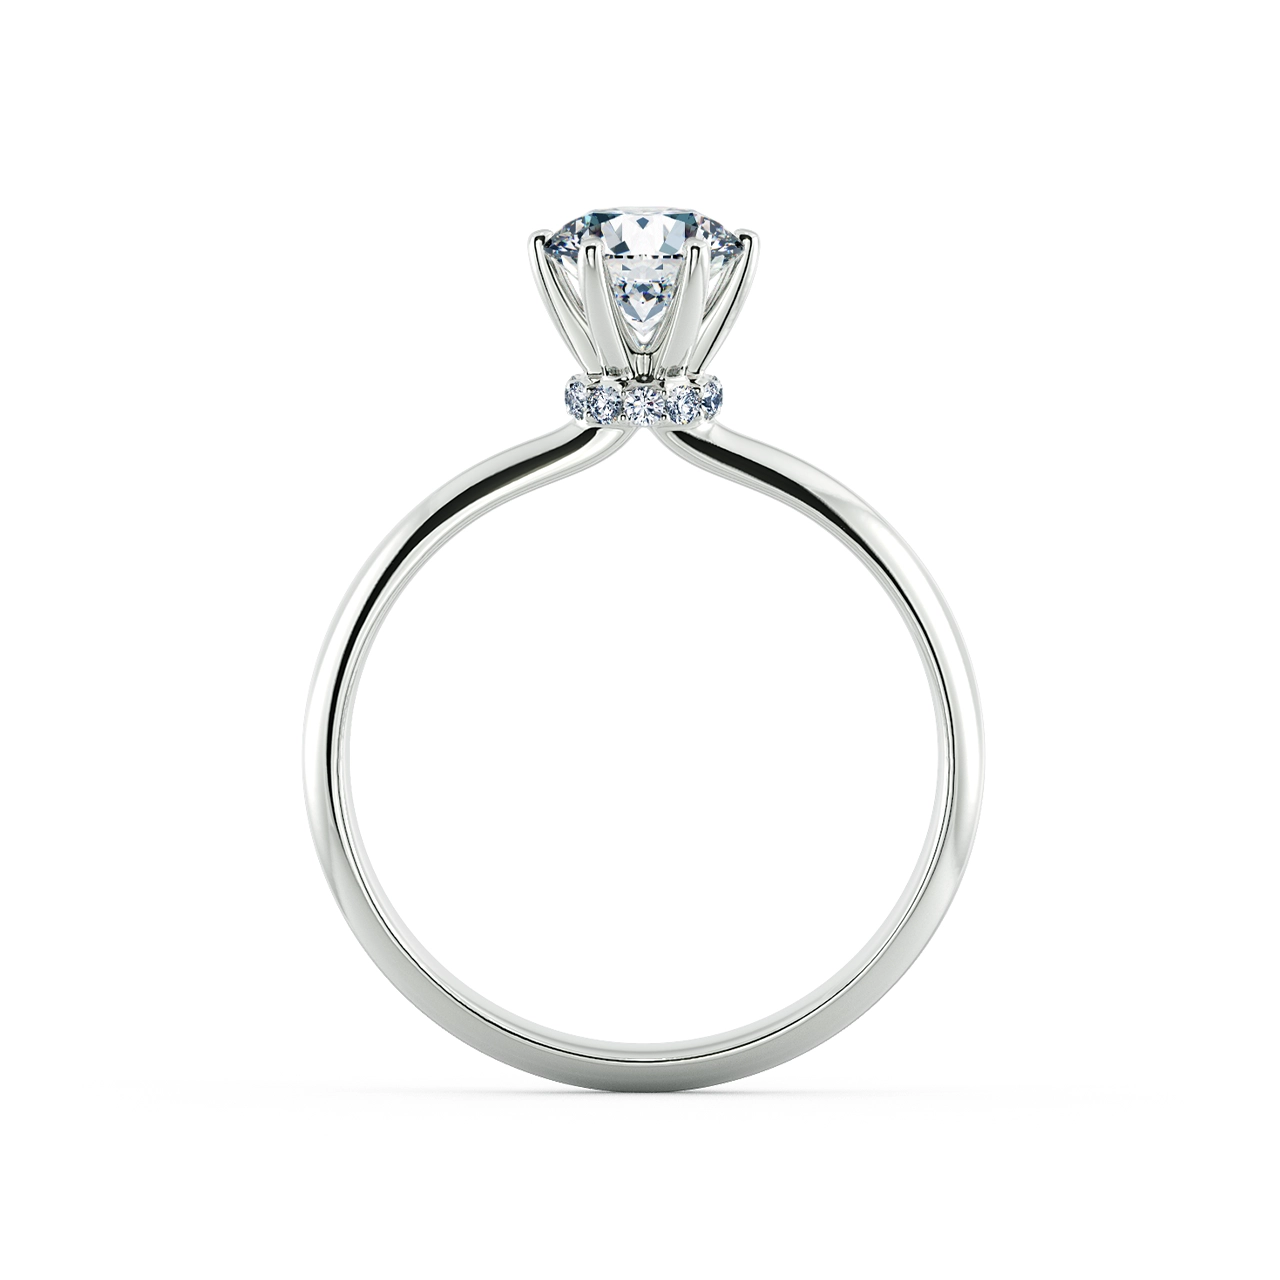 Solitaire Engagement Ring With Diamond Bezel Setting NCH1303 5